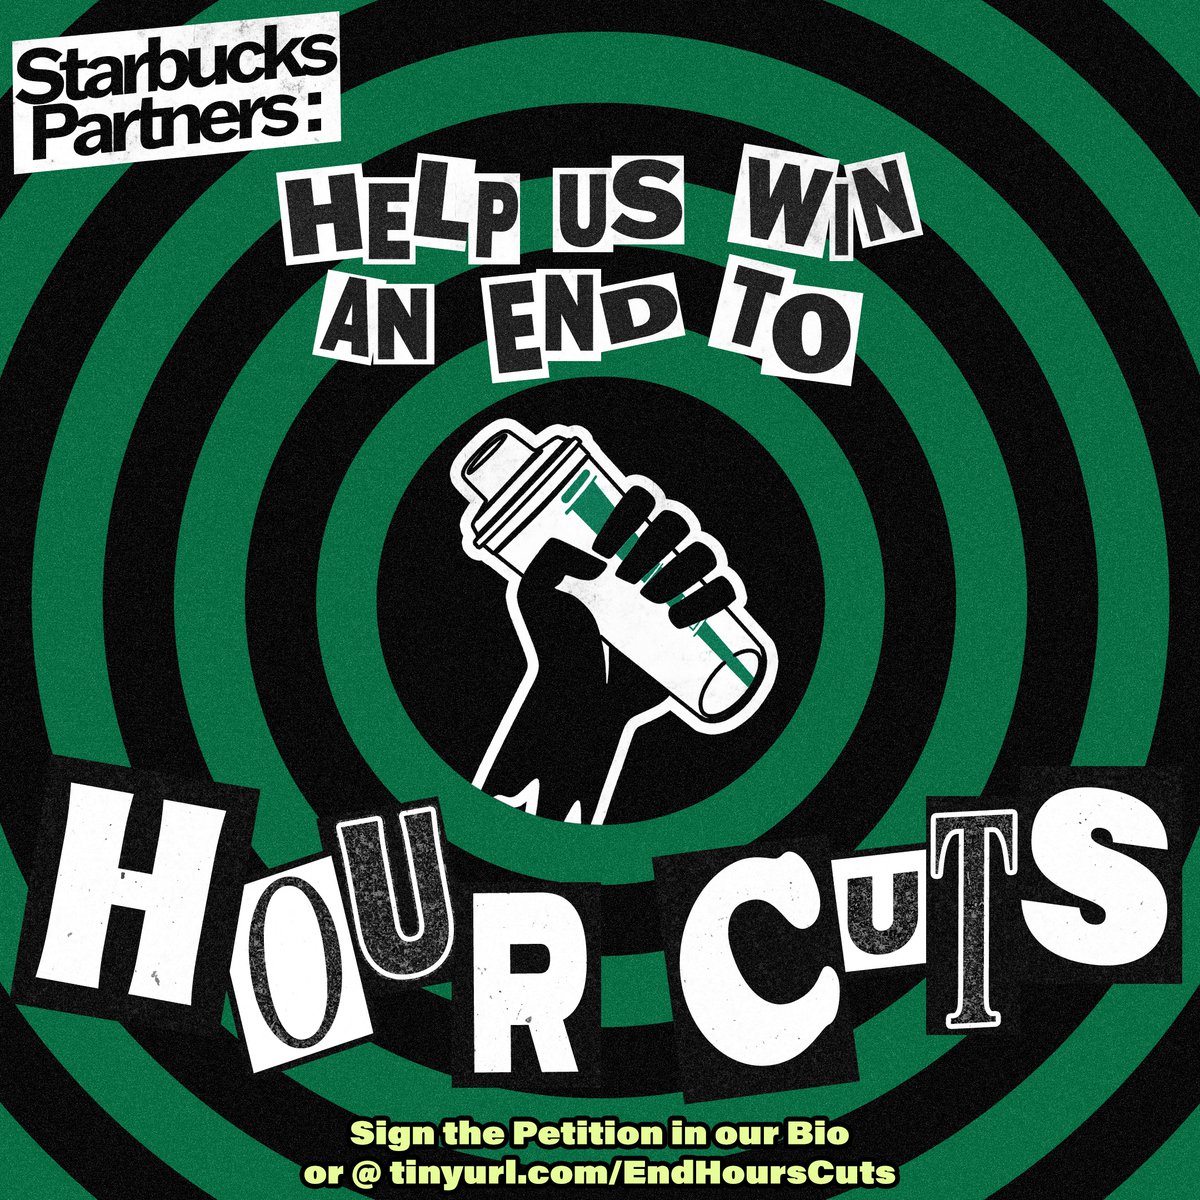 Starbucks’ “benefits” aren’t genuine benefits if your hours can be cut so much that you lose access to them. Partners, join us in the fight for stable schedules and guaranteed hours: tinyurl.com/EndHoursCuts